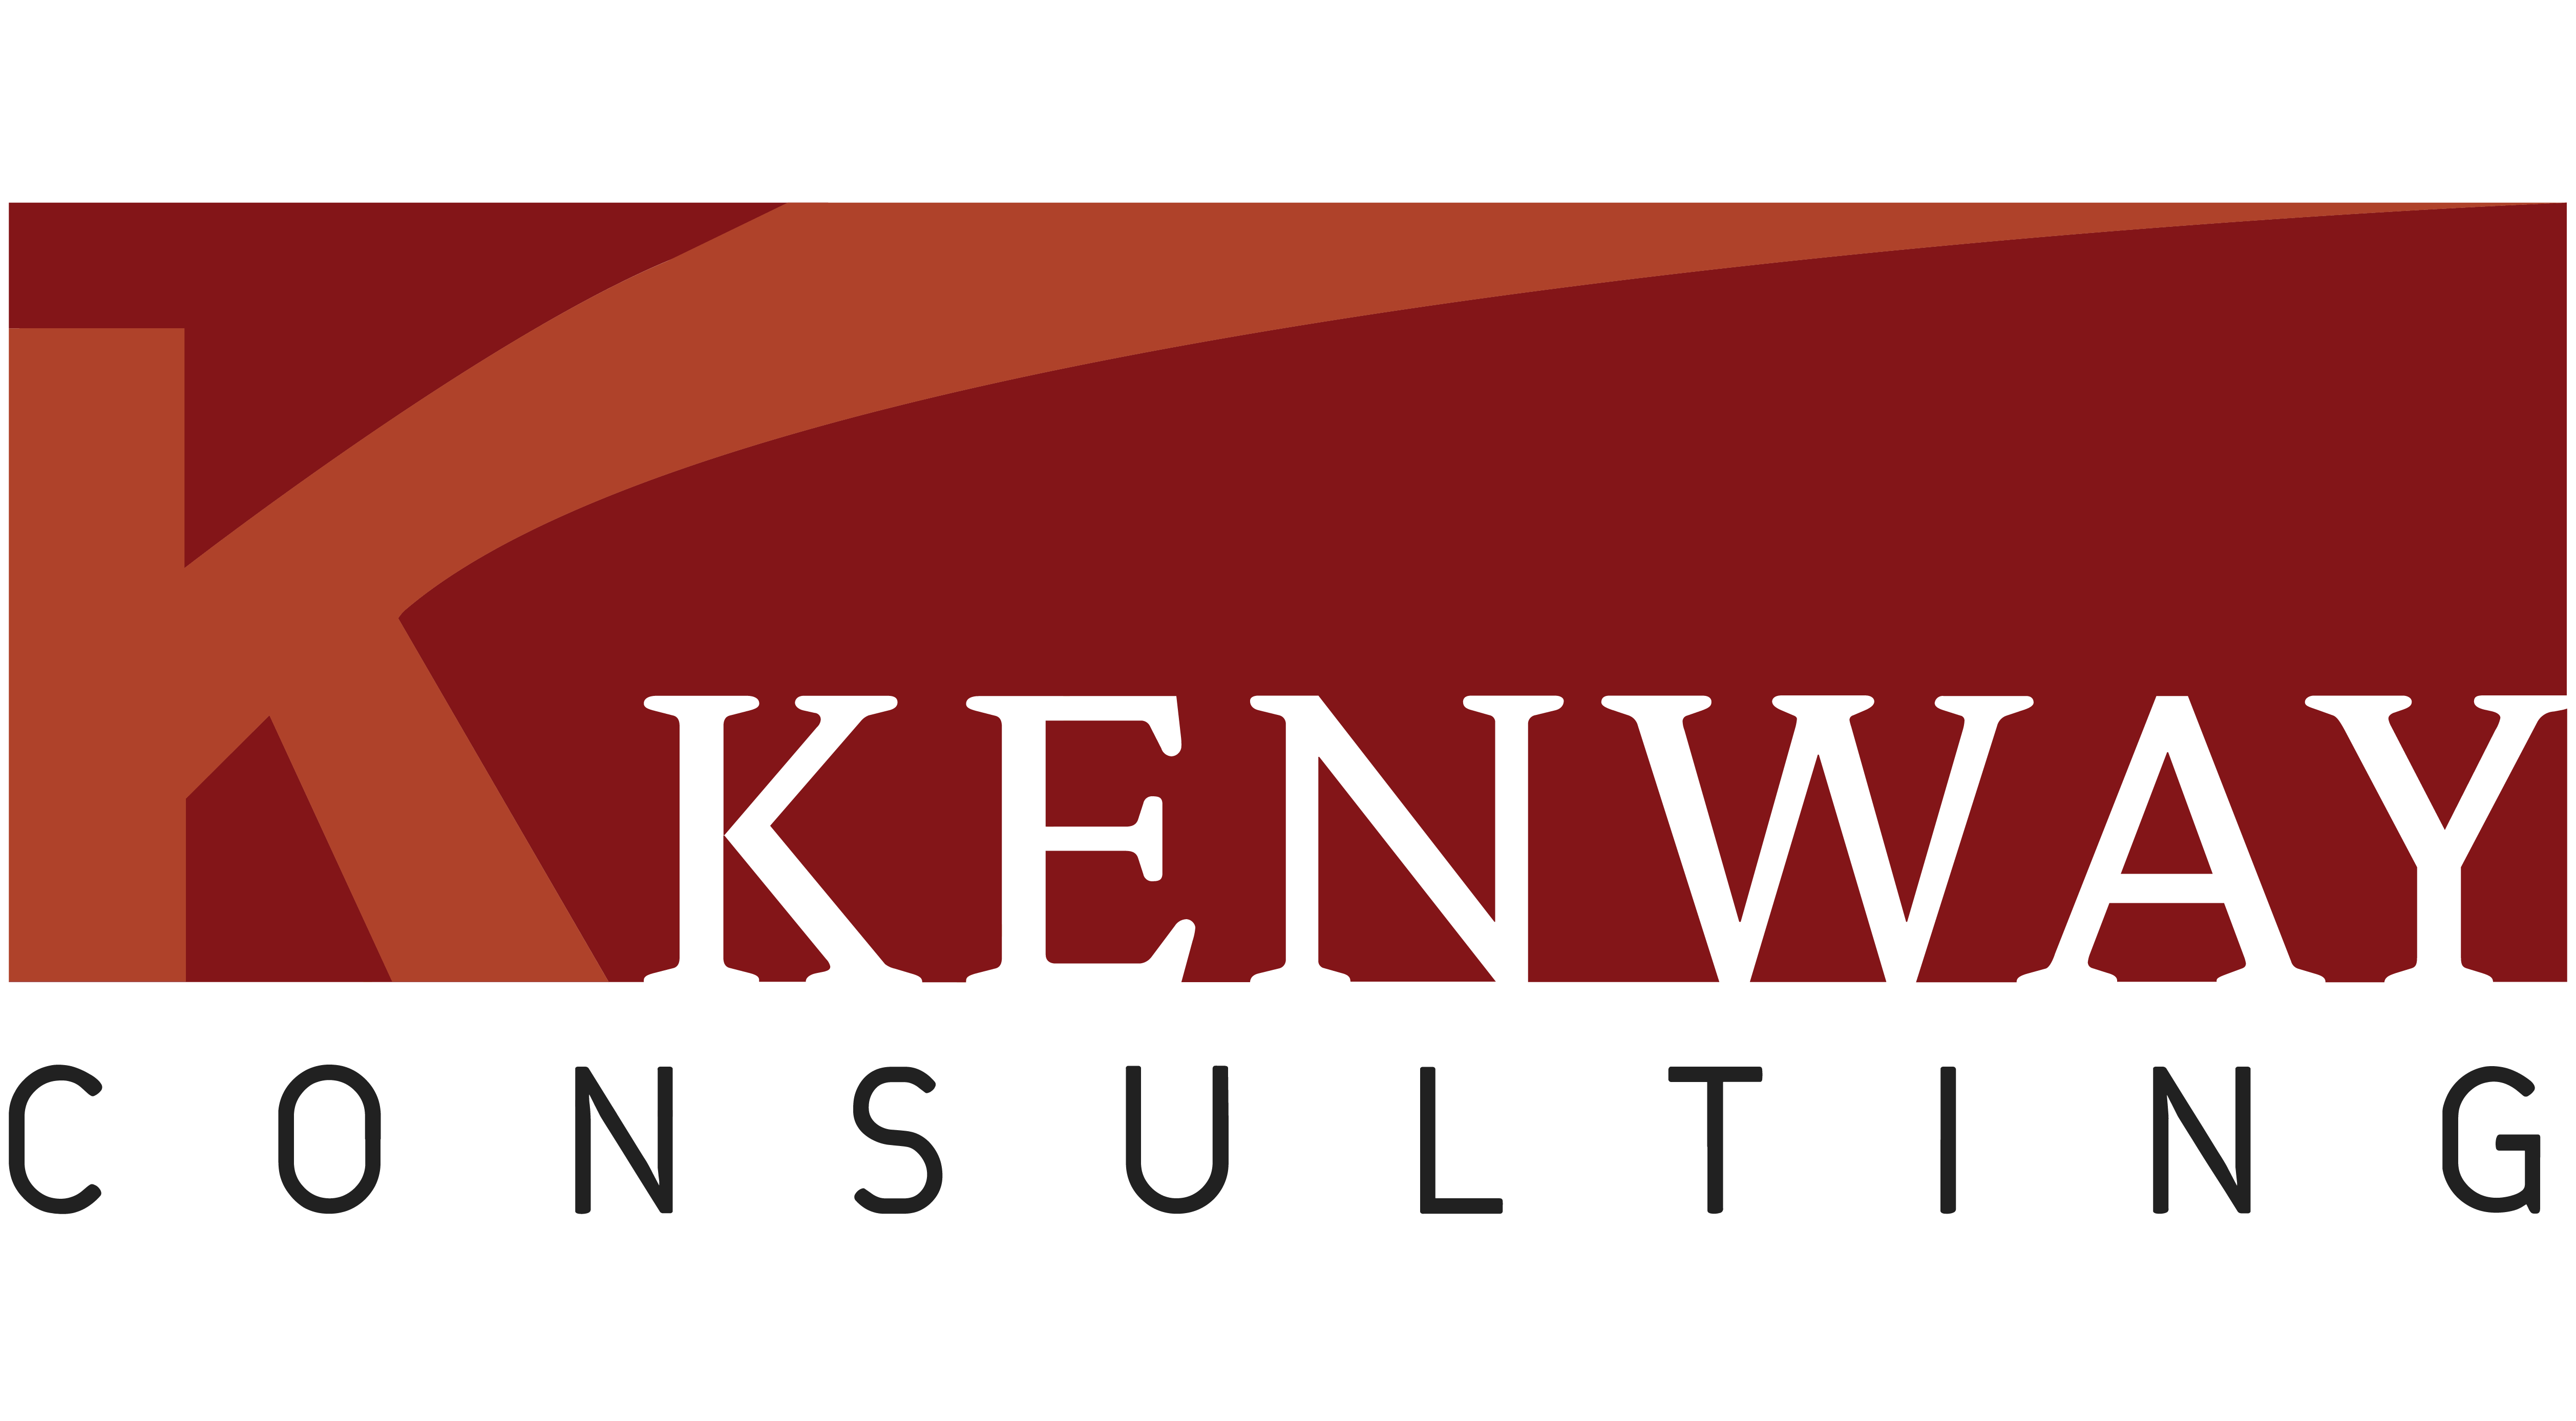 Chicago-based management and technology consulting firm Kenway Consulting announced that it is expanding to Scottsdale.